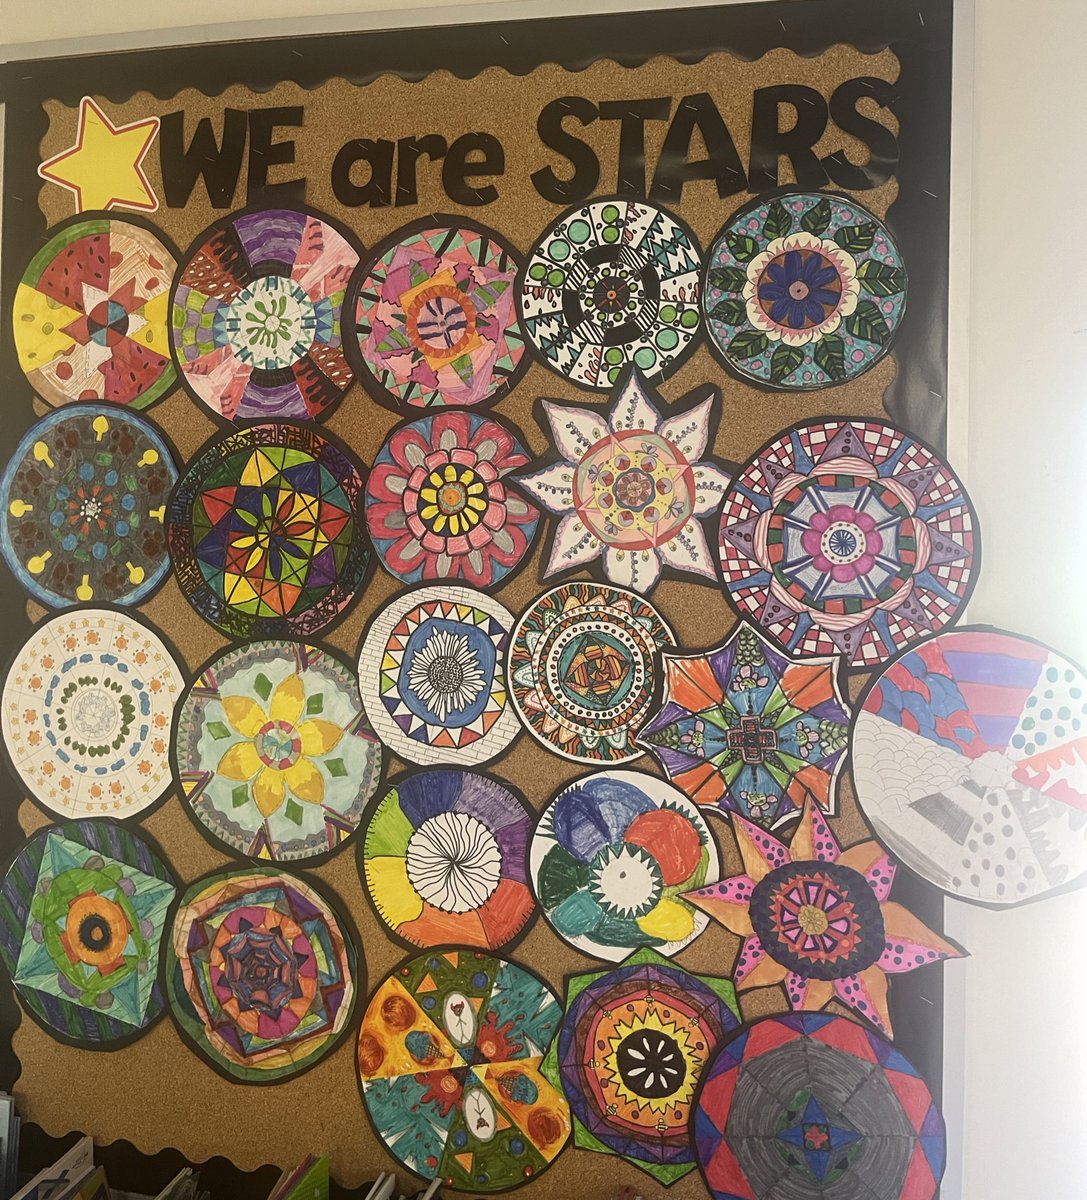 Our colourful mandalas have brightened up our classroom these past few grey, rainy days.